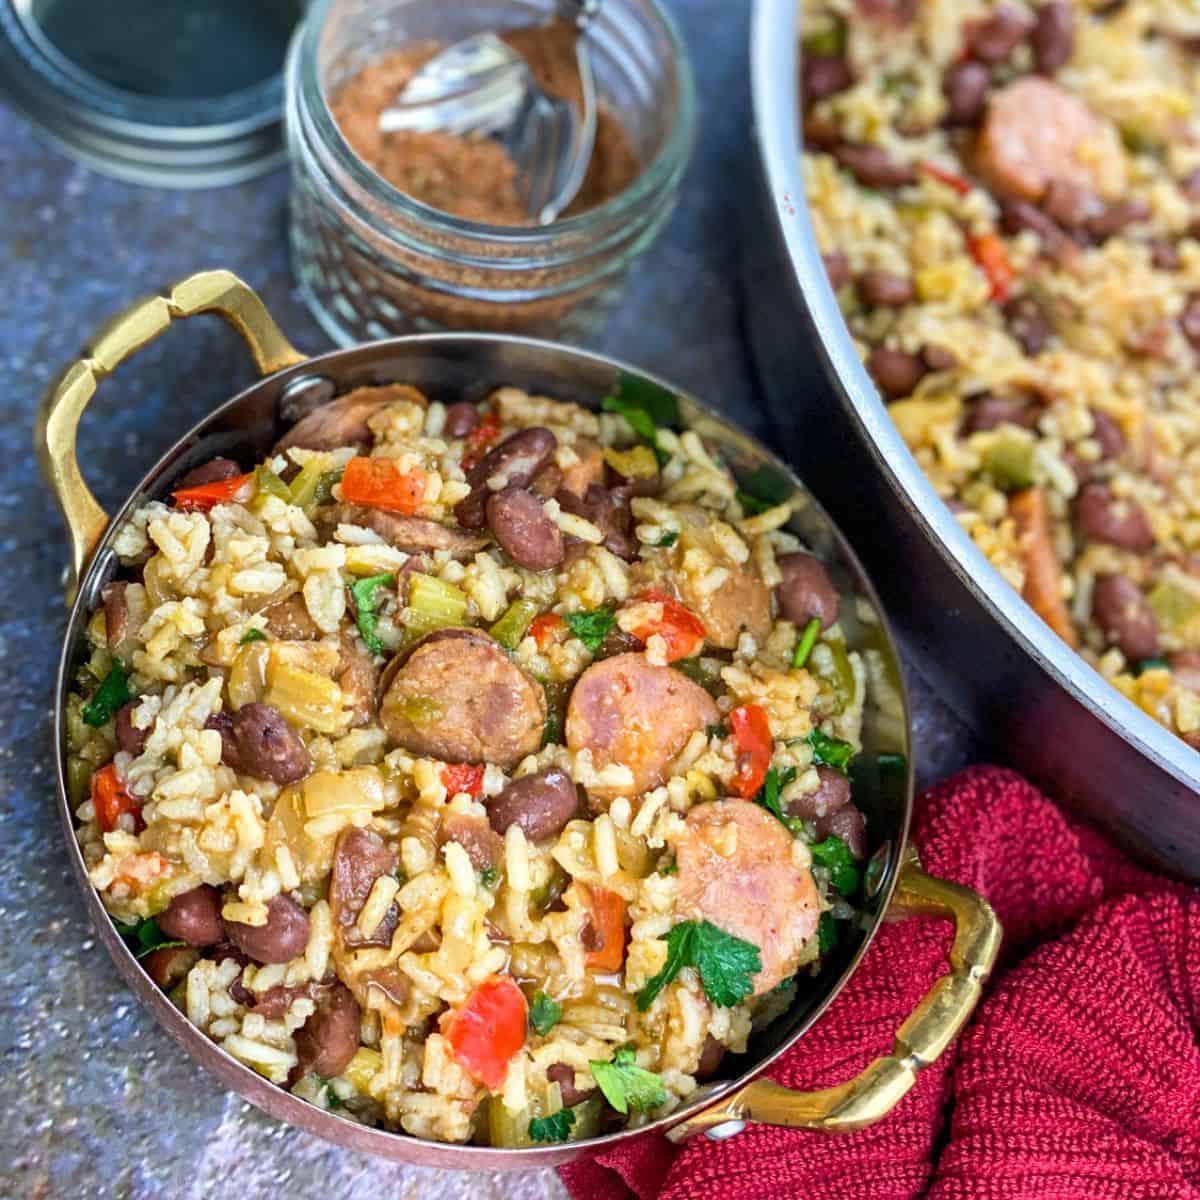 A large gold handled skillet filled with rice, sliced smoked sausage, beans, and peppers.